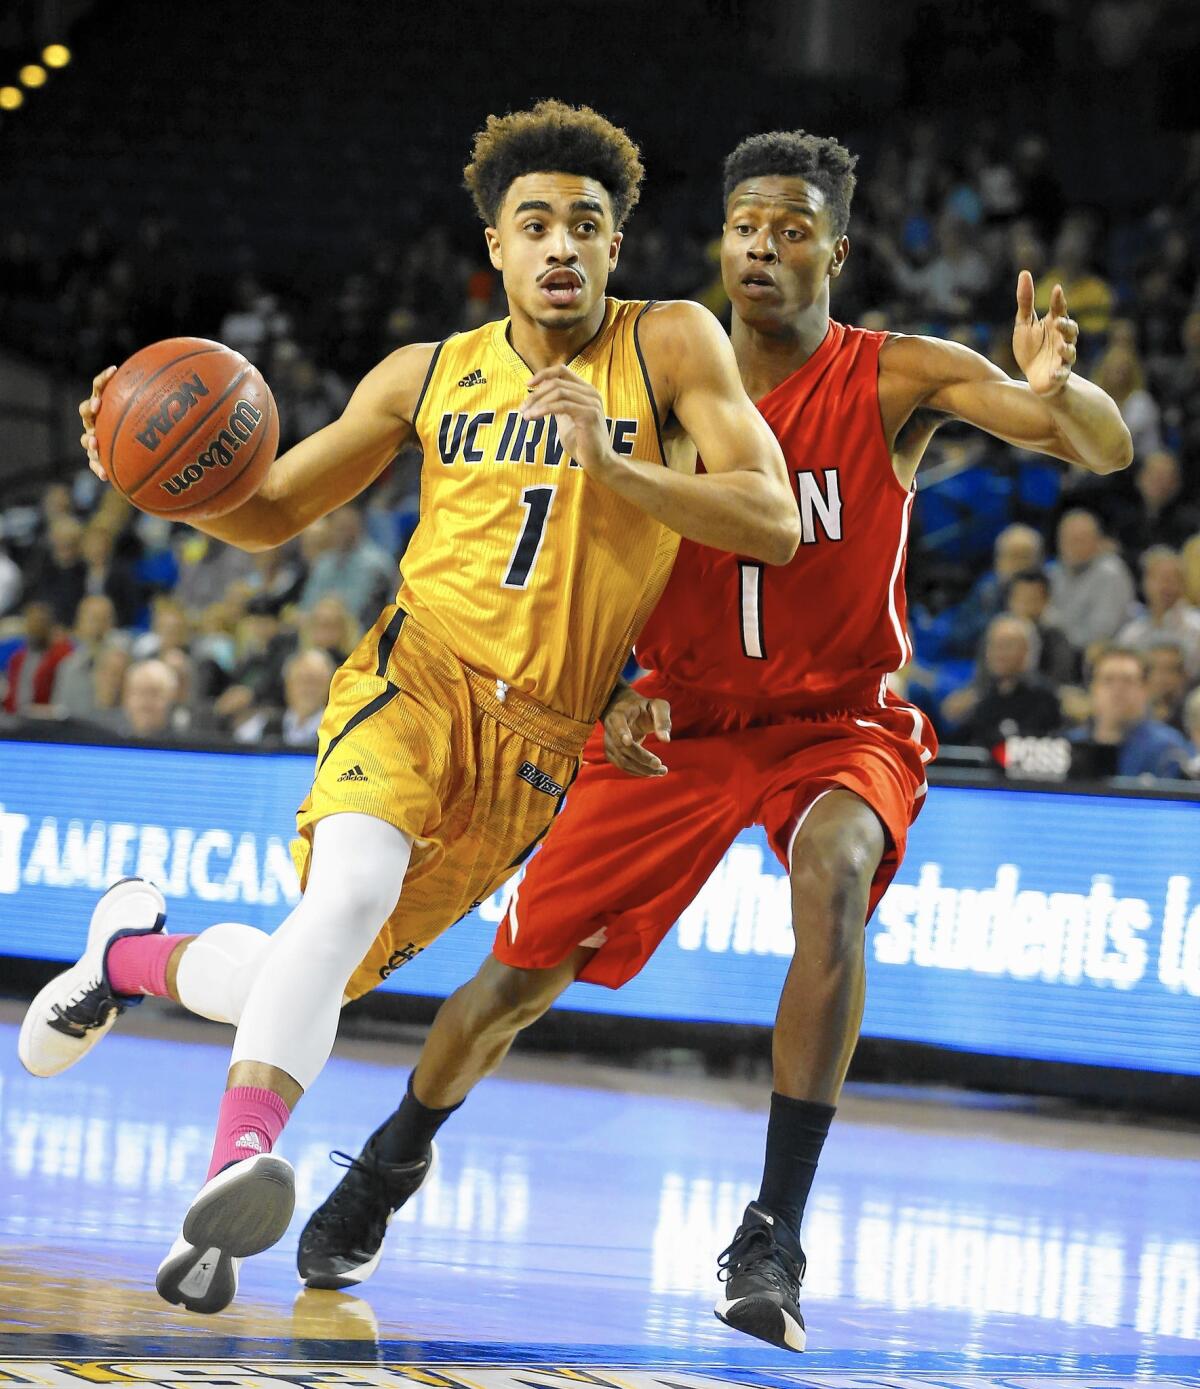 UC Irvine's Alex Young (1), who scored a career-high 36 points, gets a step on Cal State Northridge guard Micheal Warren in a Big West Conference game on Saturday.